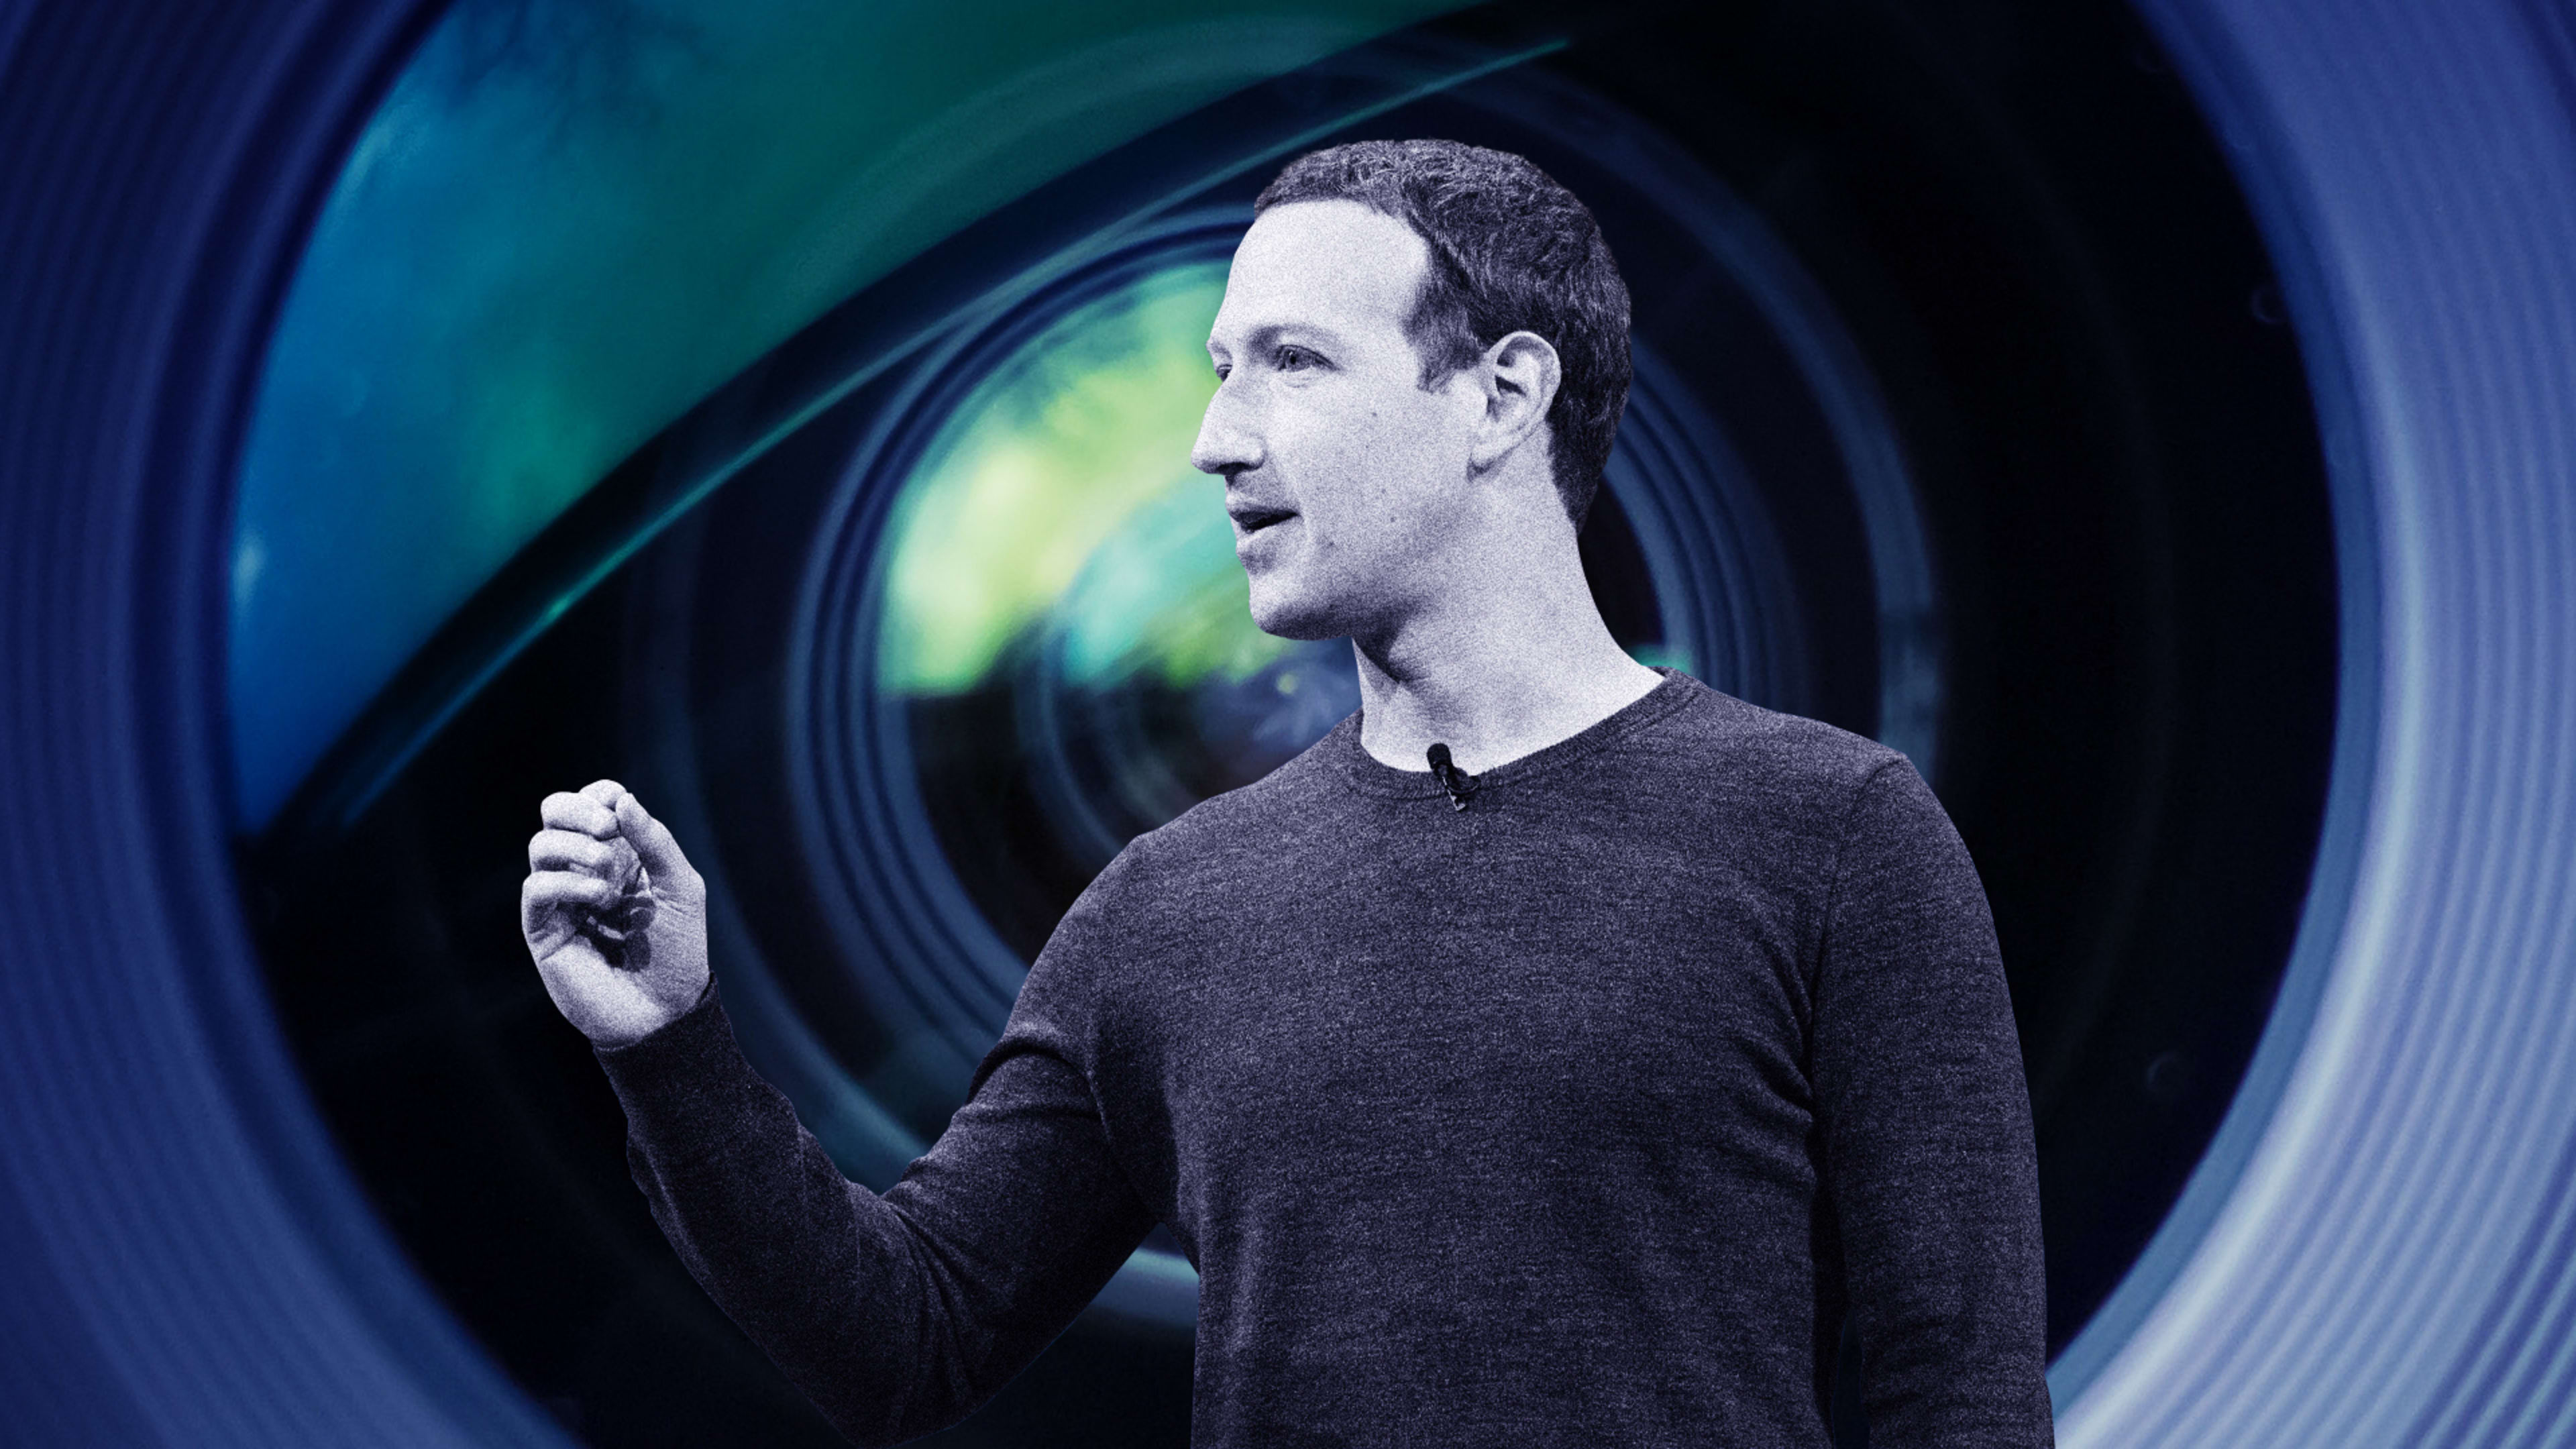 What Mark Zuckerberg’s new vision could really mean for privacy and propaganda